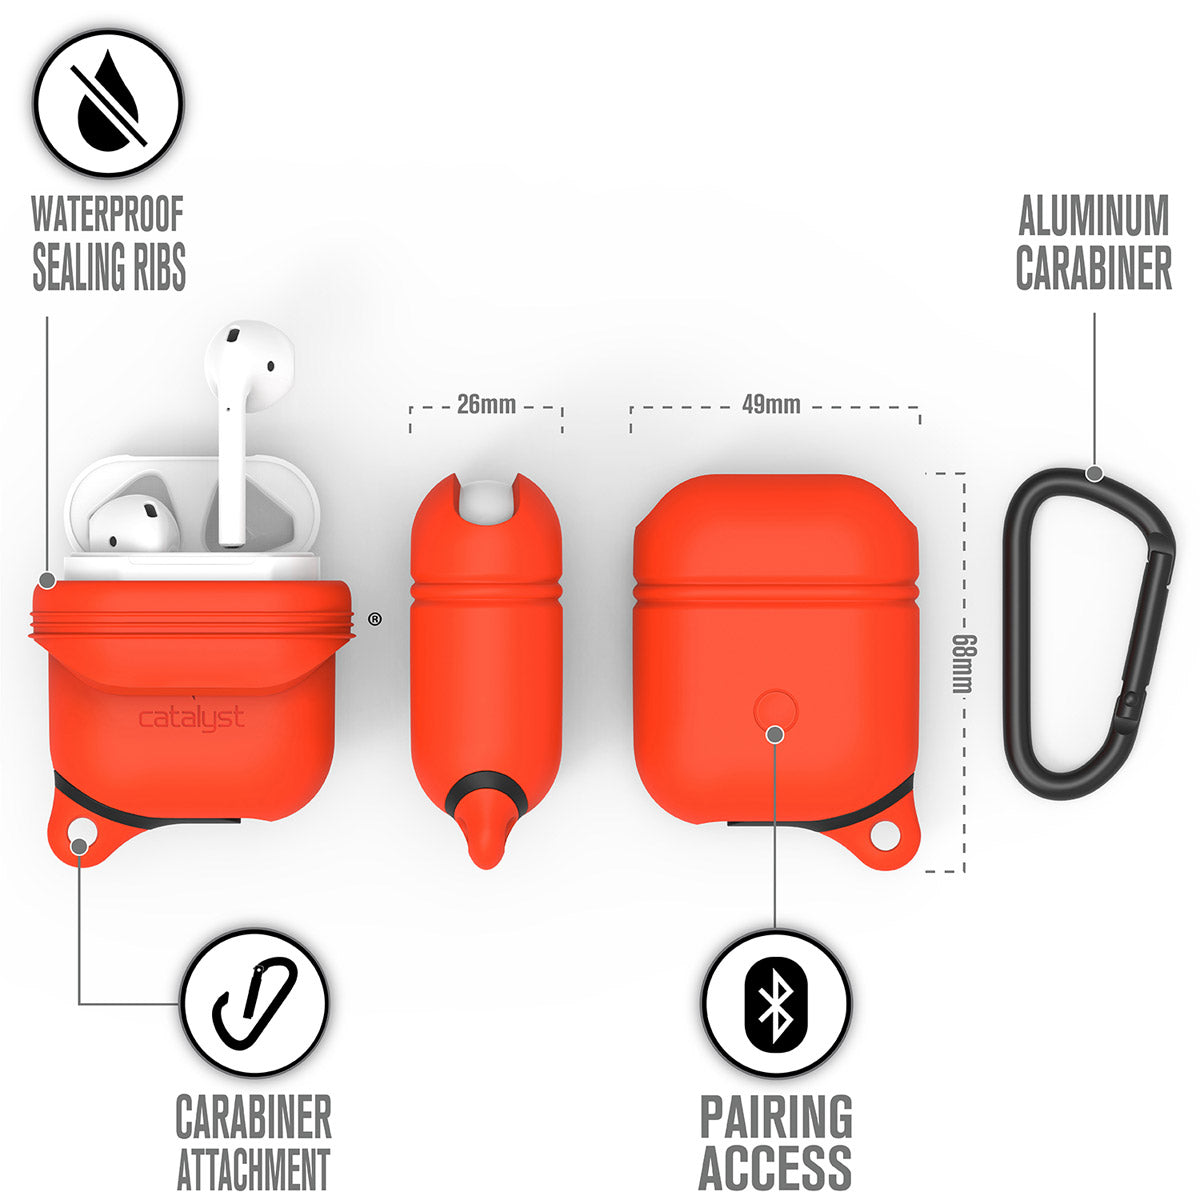 Catalyst airpods gen2/1 waterproof case + carabiner showing the case dimension and features in sunset text reads waterproof sealing ribs aluminum carabiner pairing access carabiner attachment